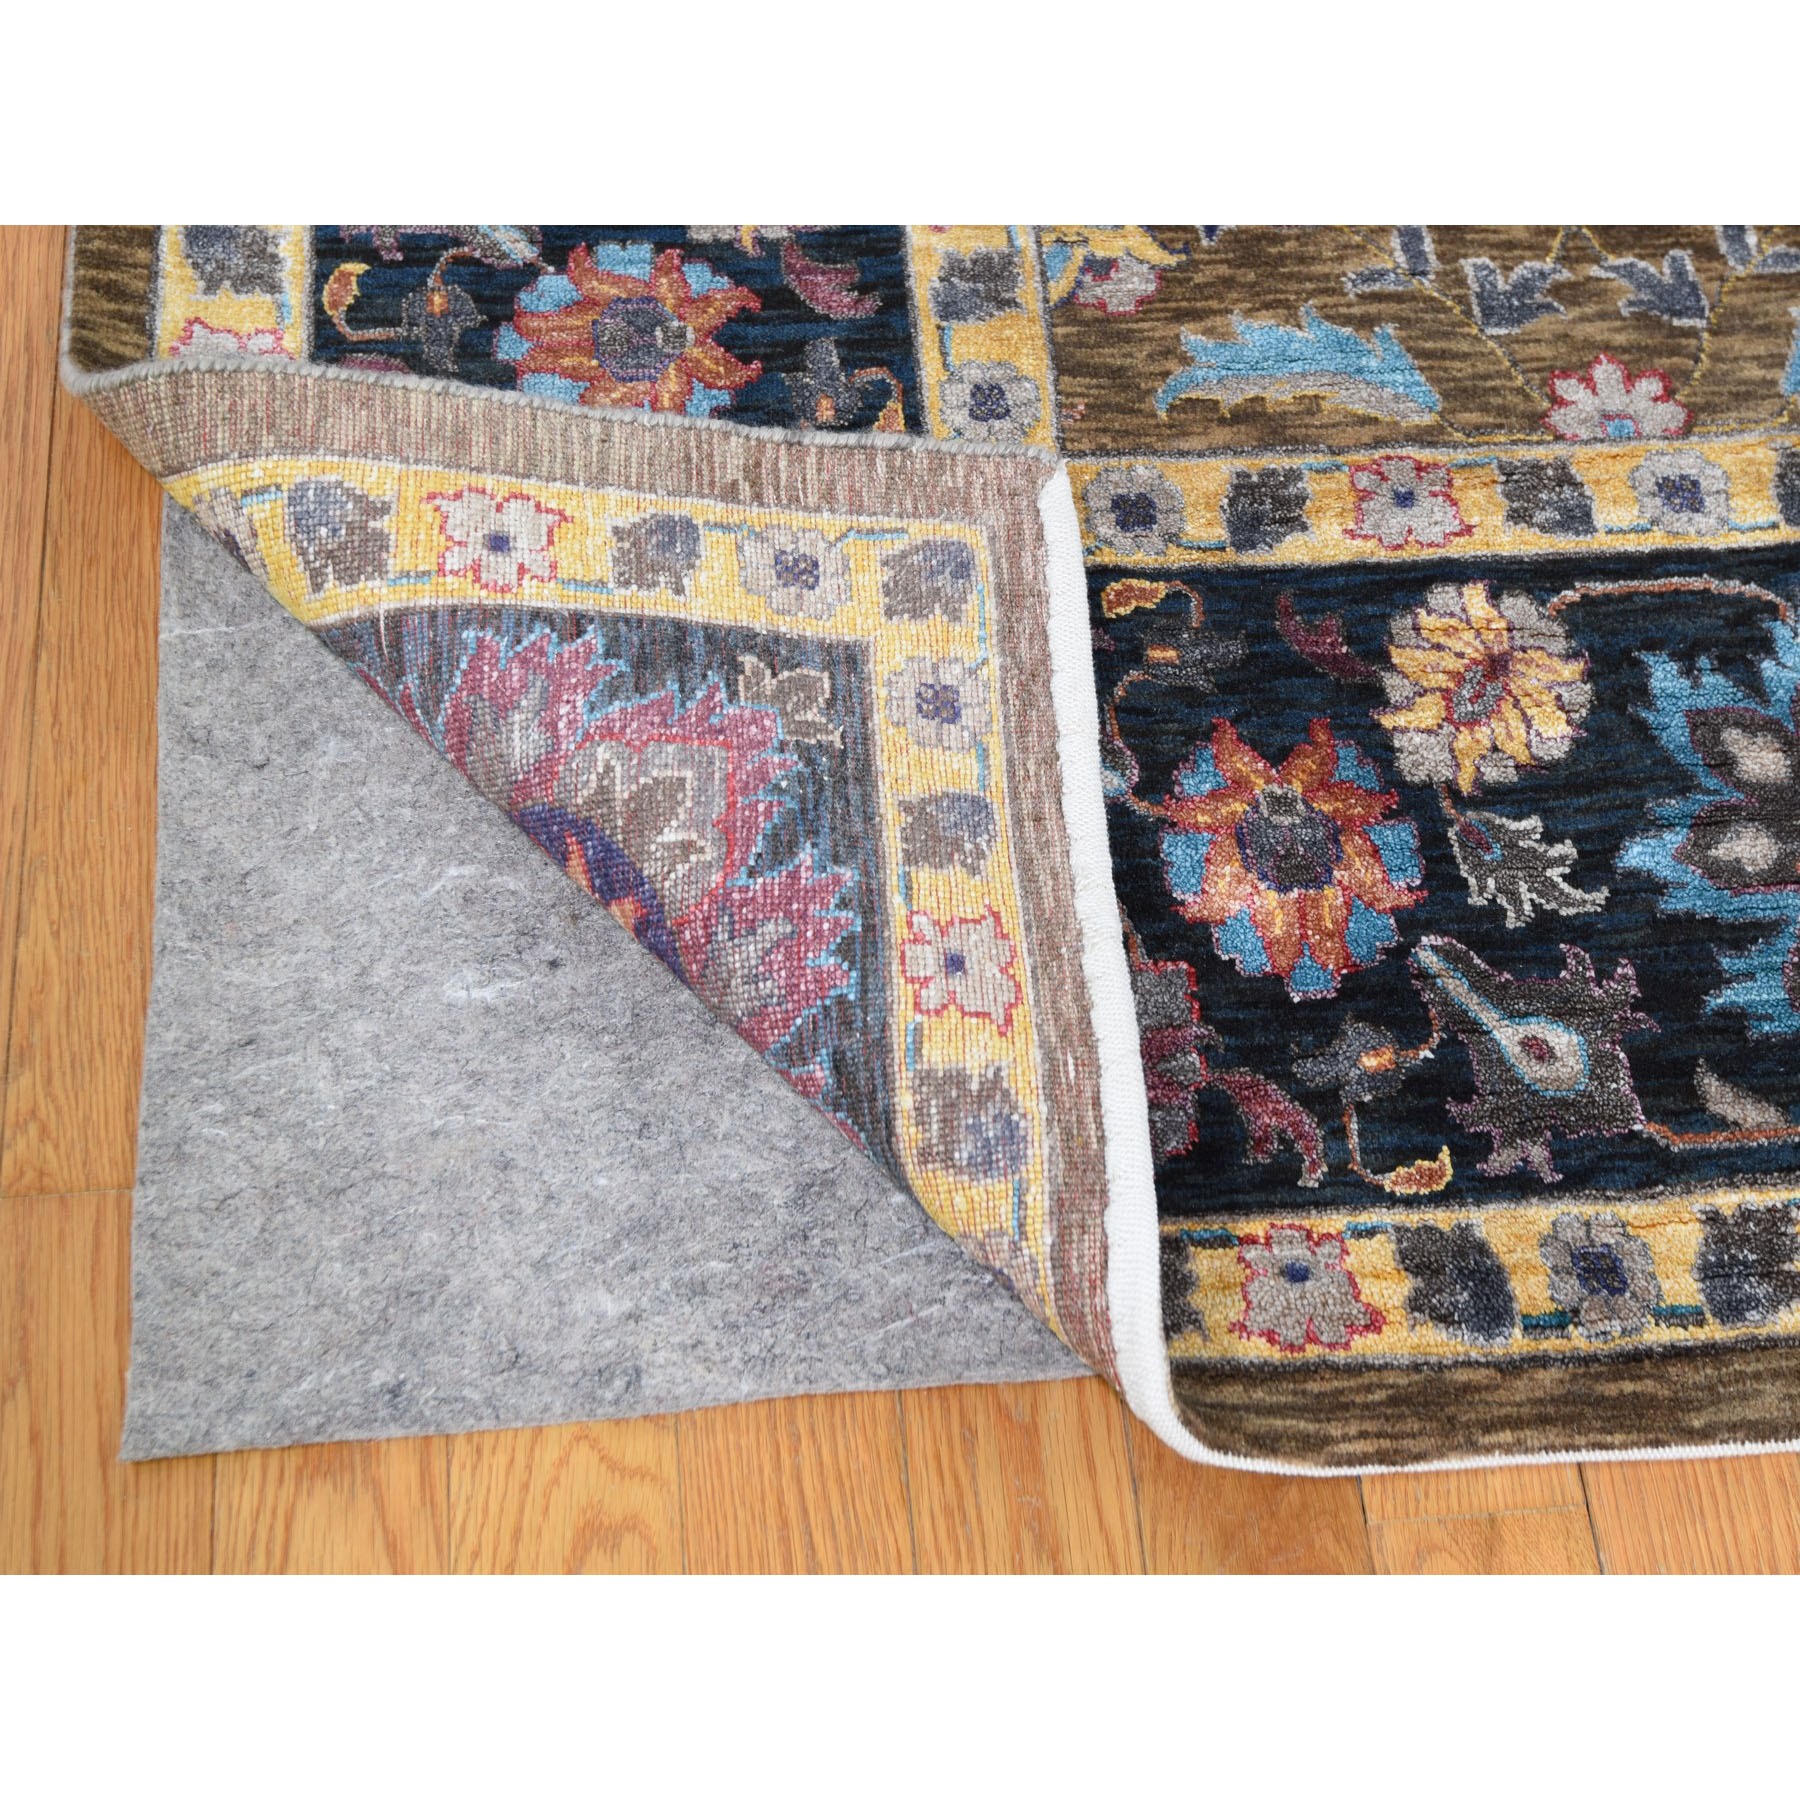 8-10 x12- Brown Silk With Textured Wool Persian Design Hand Knotted Oriental Rug 